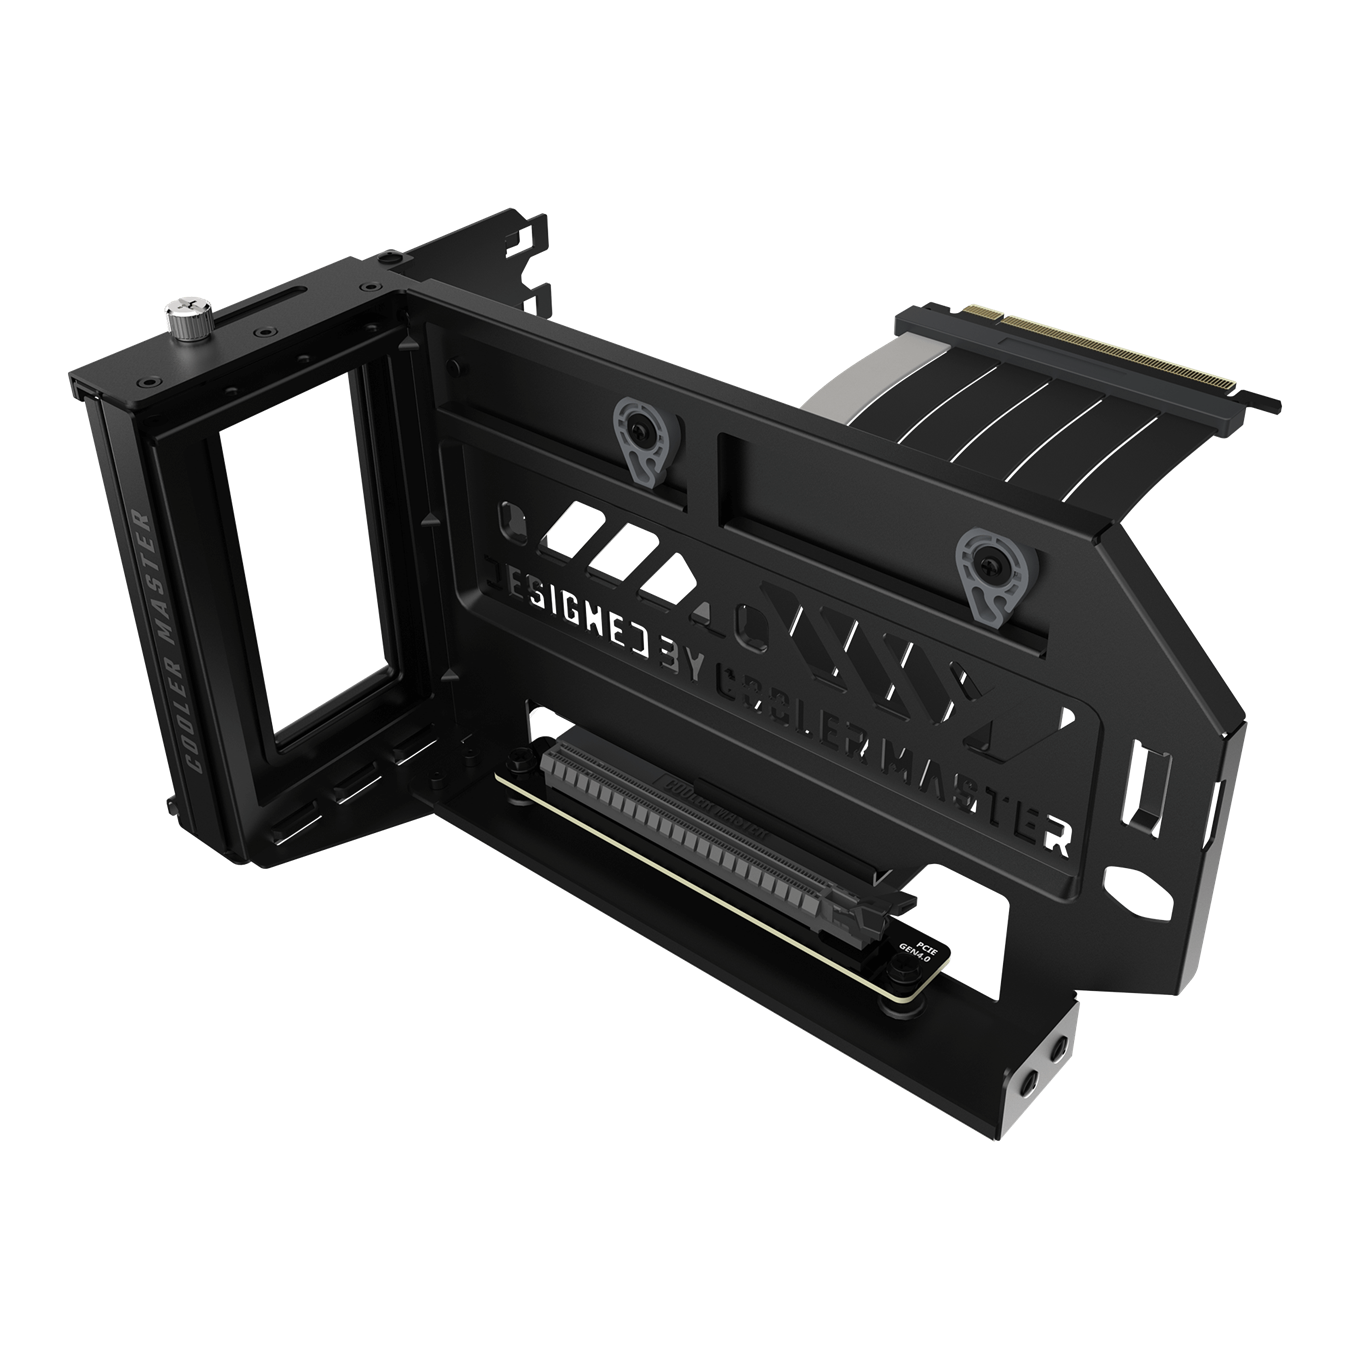 Give your chassis an instant makeover with Cooler Master’s Vertical Graphics Card Holder Kit V3!